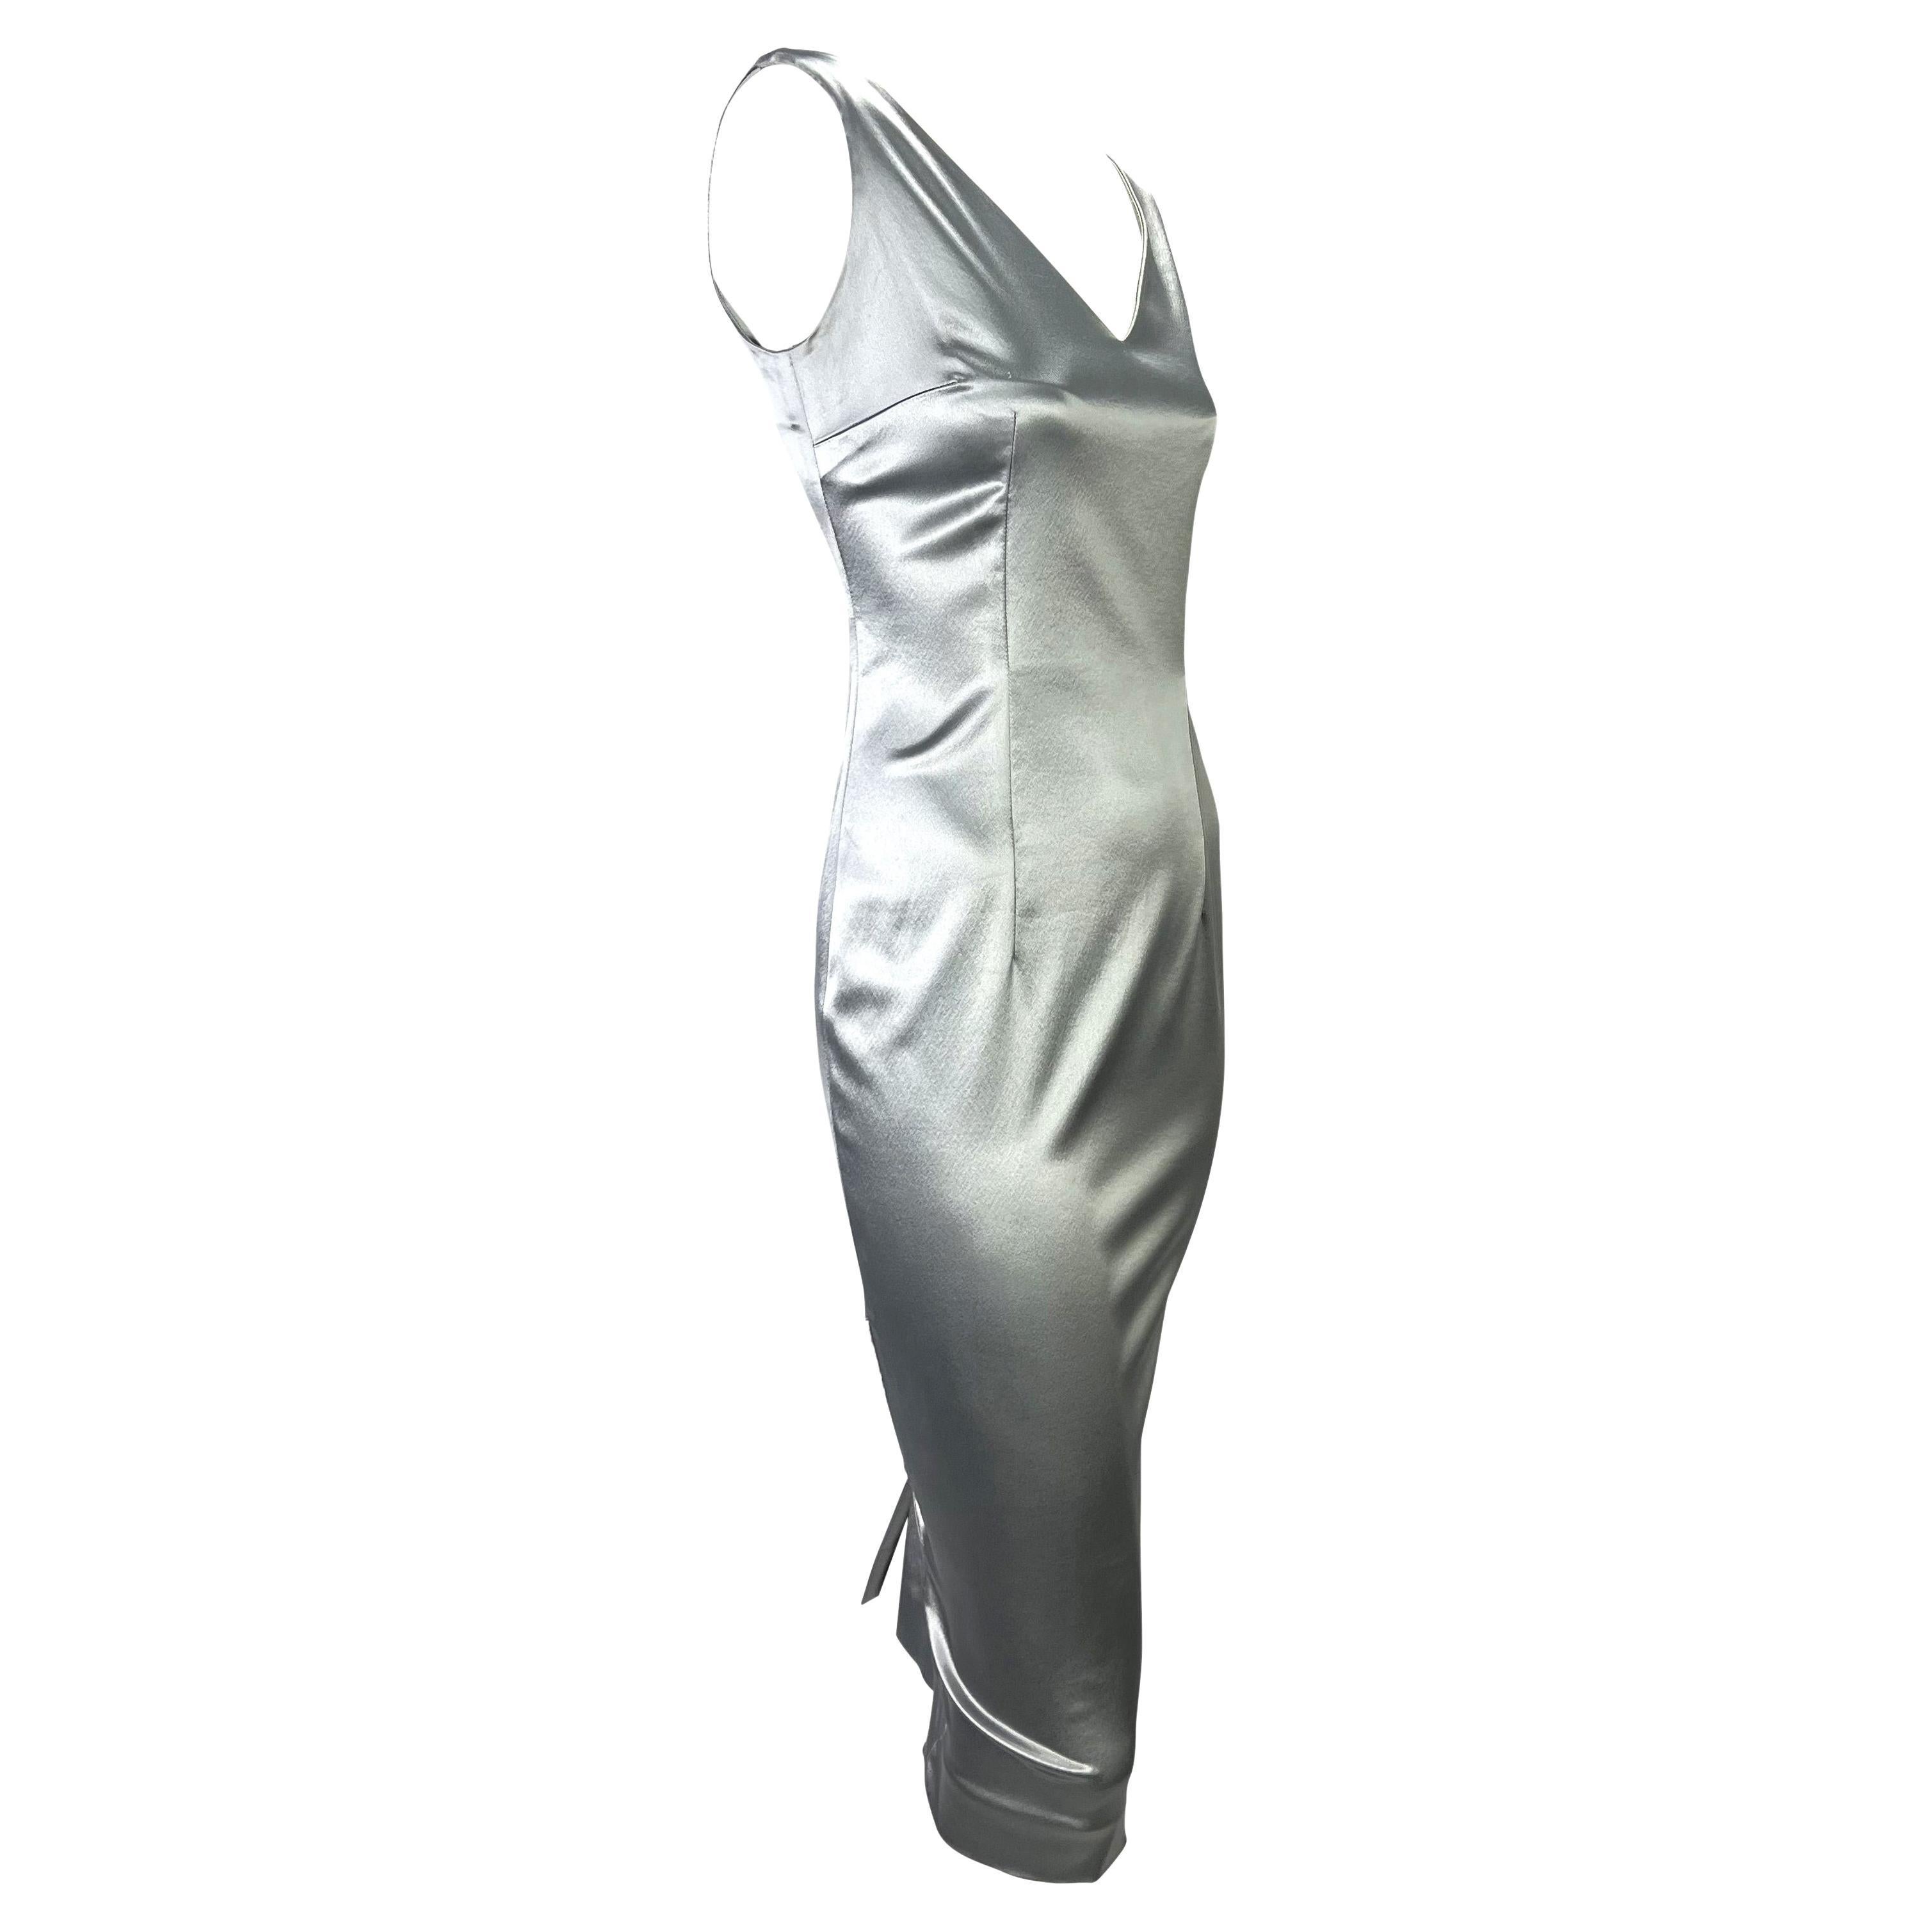 S/S 2004 Christian Dior by John Galliano Silver Satin Bodycon Tube Dress In Good Condition For Sale In West Hollywood, CA